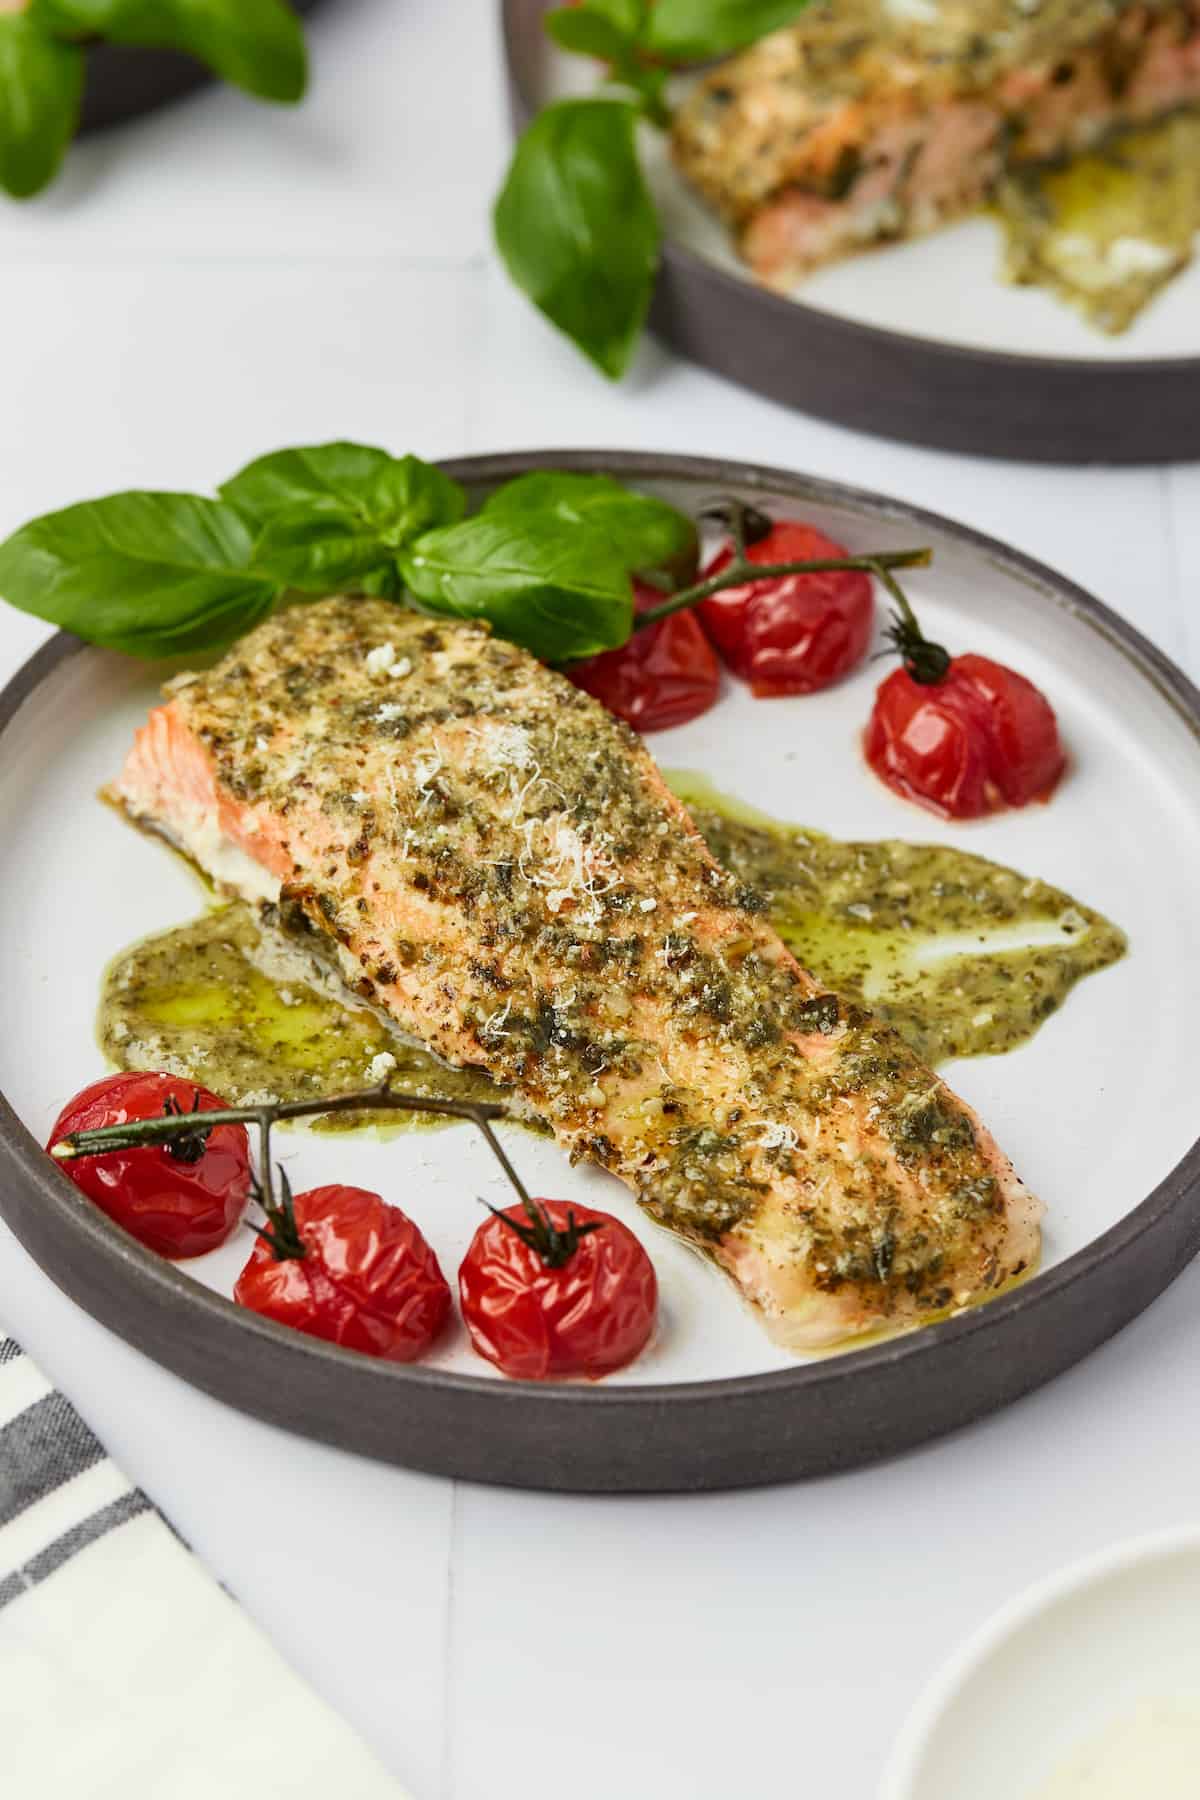 Baked pesto salmon fillet on plate with roasted tomatoes